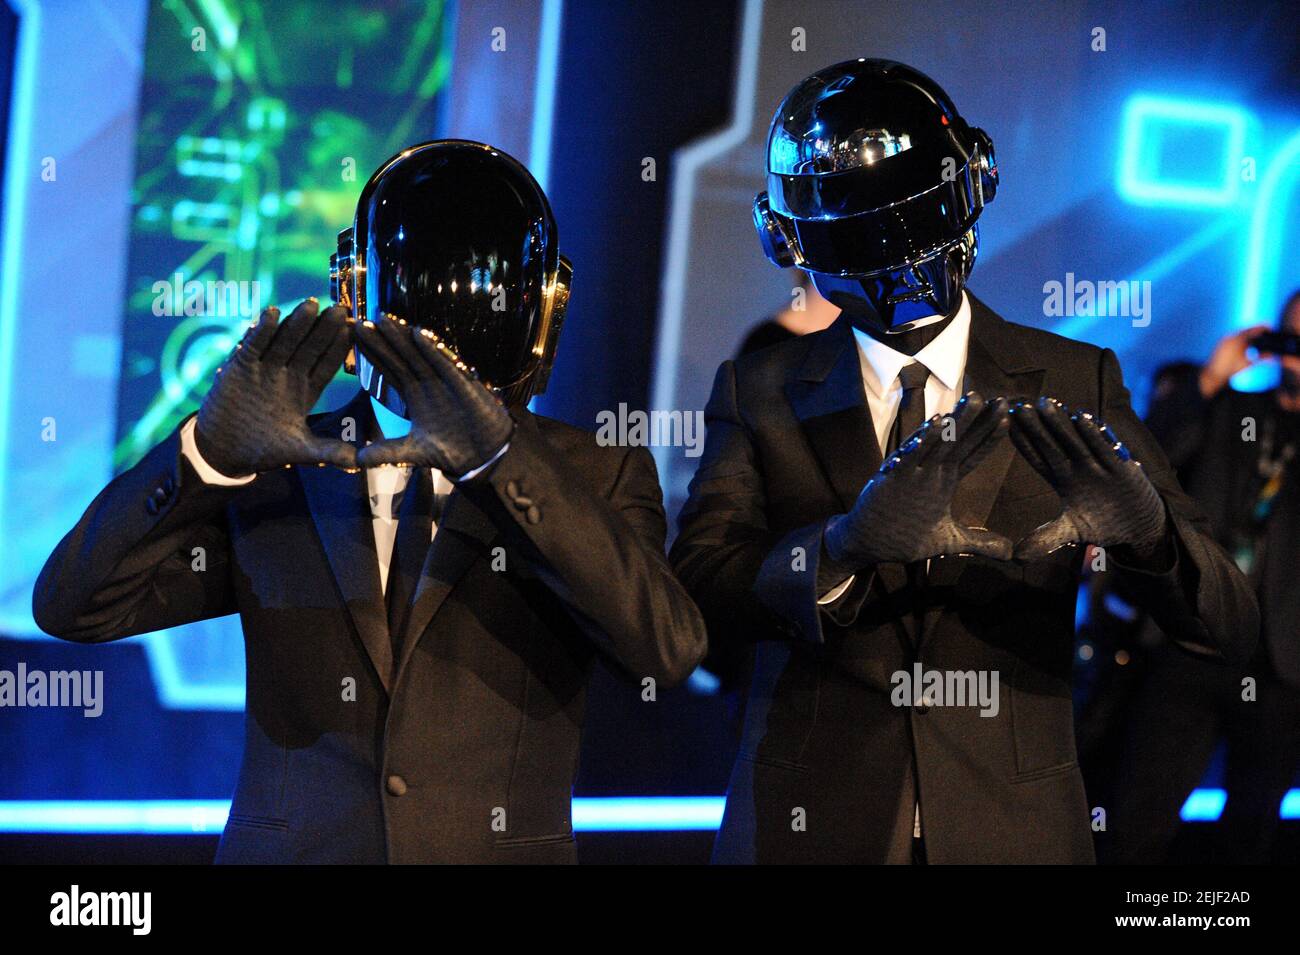 File photo dated December 11, 2010 of Musicians Thomas Bangalter and Guy-Manuel De Homem-Christo of Daft Punk attend the world premiere of Walt Disney Pictures 'Tron: Legacy' at El Capitan Theatre in Los Angeles. - Daft Punk have confirmed their break-up, after a career spanning over 28 years. The Parisian duo, who are considered to be one of the most influential electronic acts of all time, confirmed the news in an eight-minute video called 'Epilogue' Photo by Lionel Hahn/ABACAPRESS.COM Stock Photo